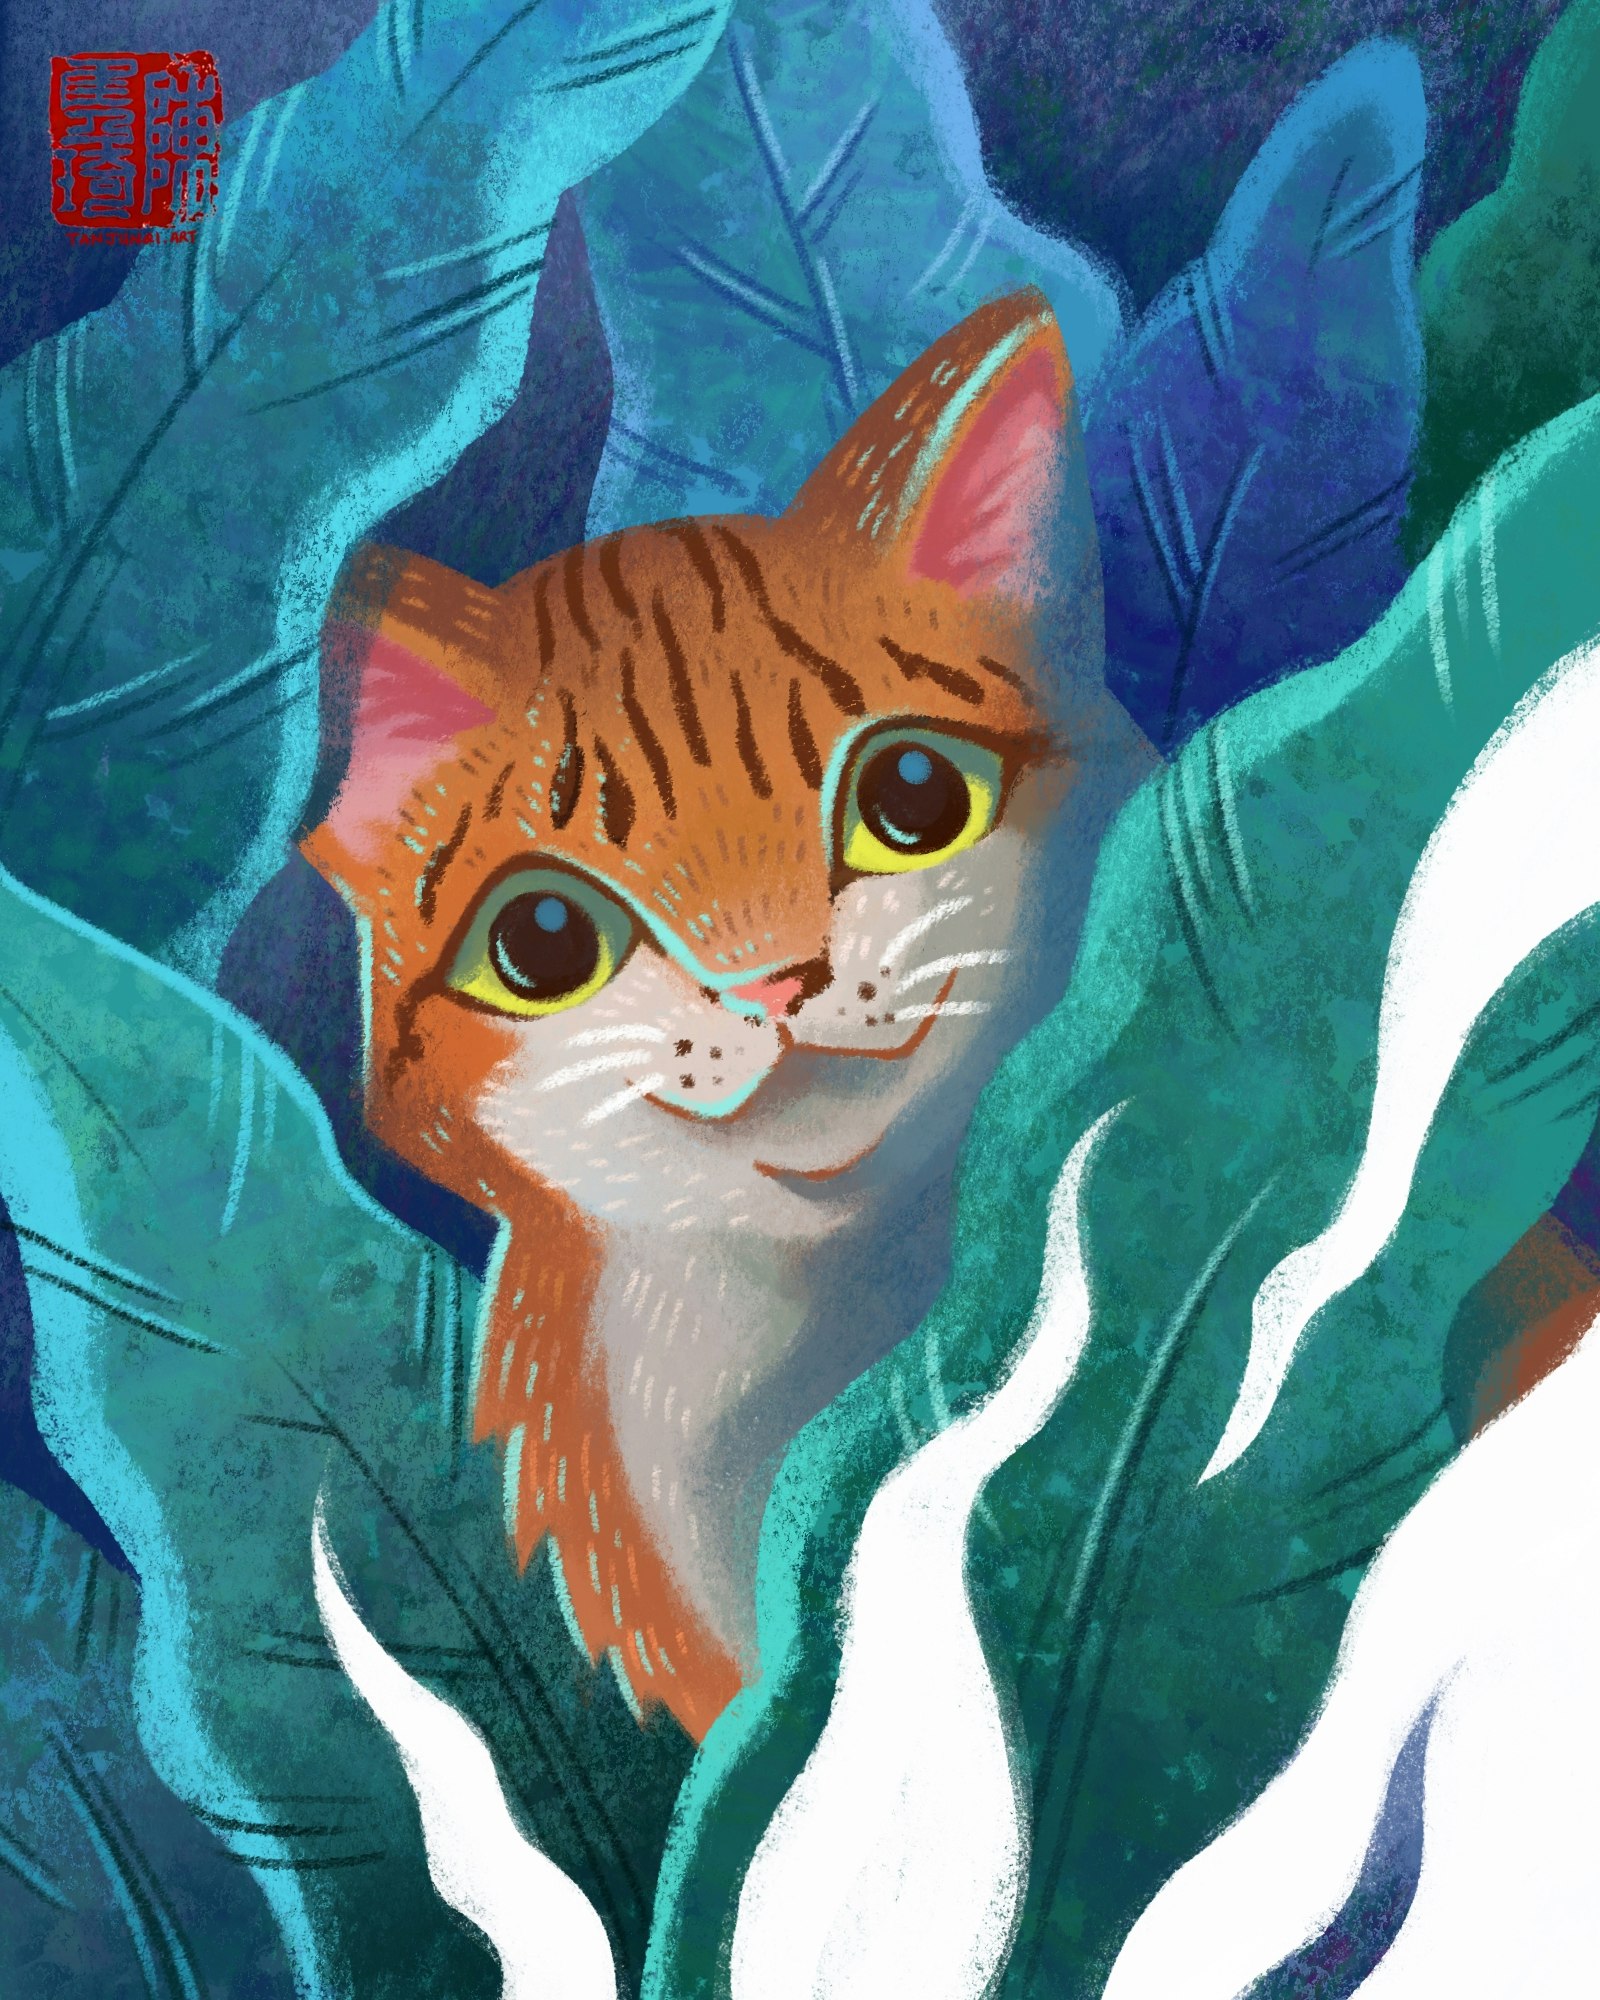 Digital painting of an orange and white tabby cat with large green eyes peering at the viewer through broadleaf green/blue leaves, in a graphic, textured style.